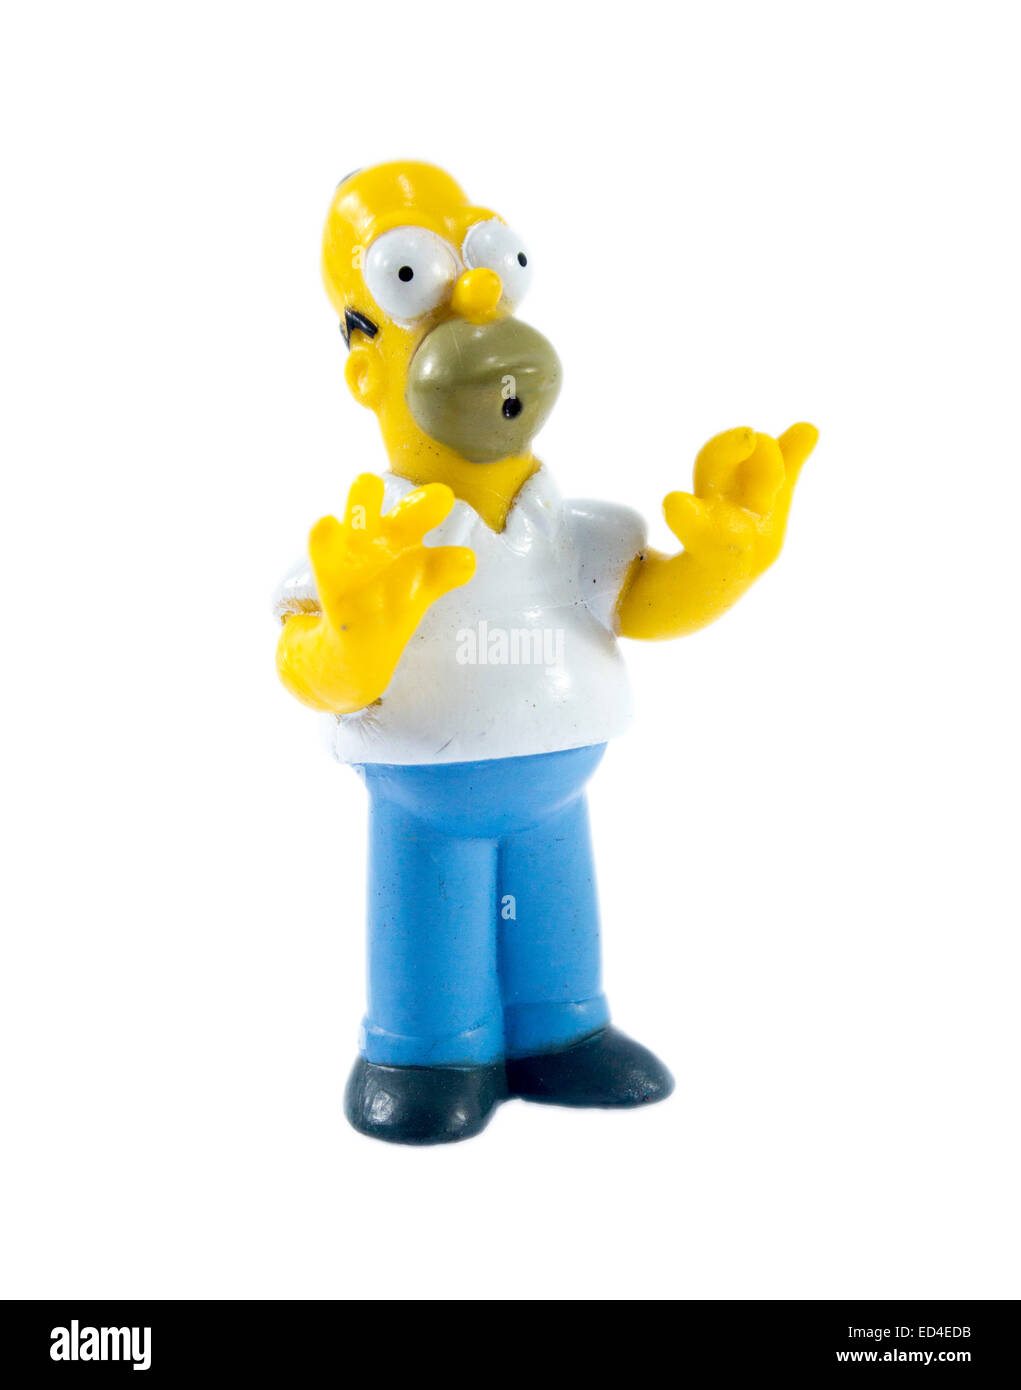 Amman, Jordan - November  1, 2014:  homer Simpson figure toy character from The Simpsons family. The Simpsons is an American ani Stock Photo